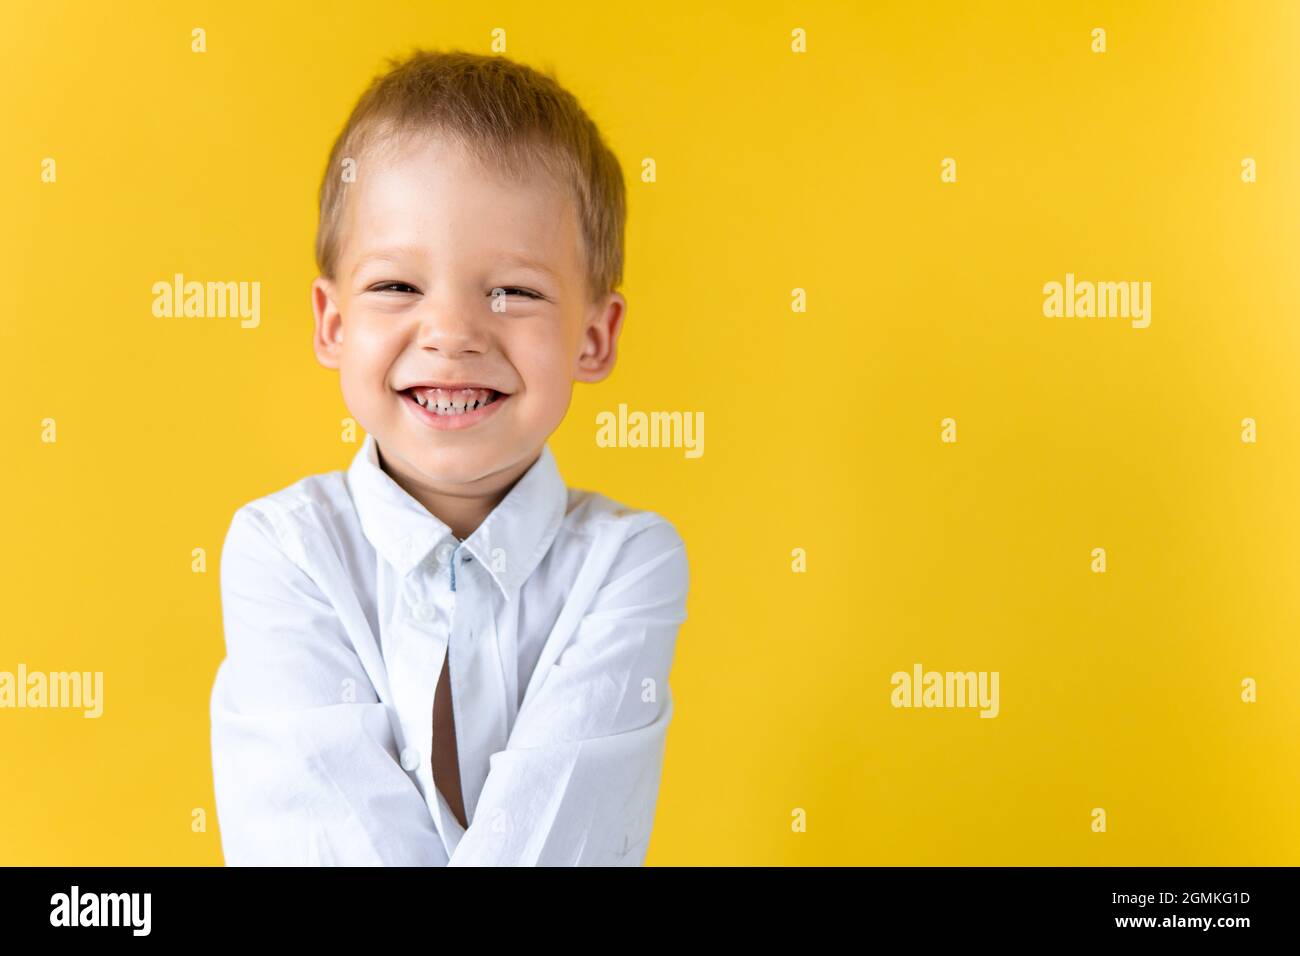 Banner Funny Preschool Child Boy in unbuttoned shirt smile narrow eye on Yellow Background Copy Space. Happy Smiling Kid Go Back to School Stock Photo